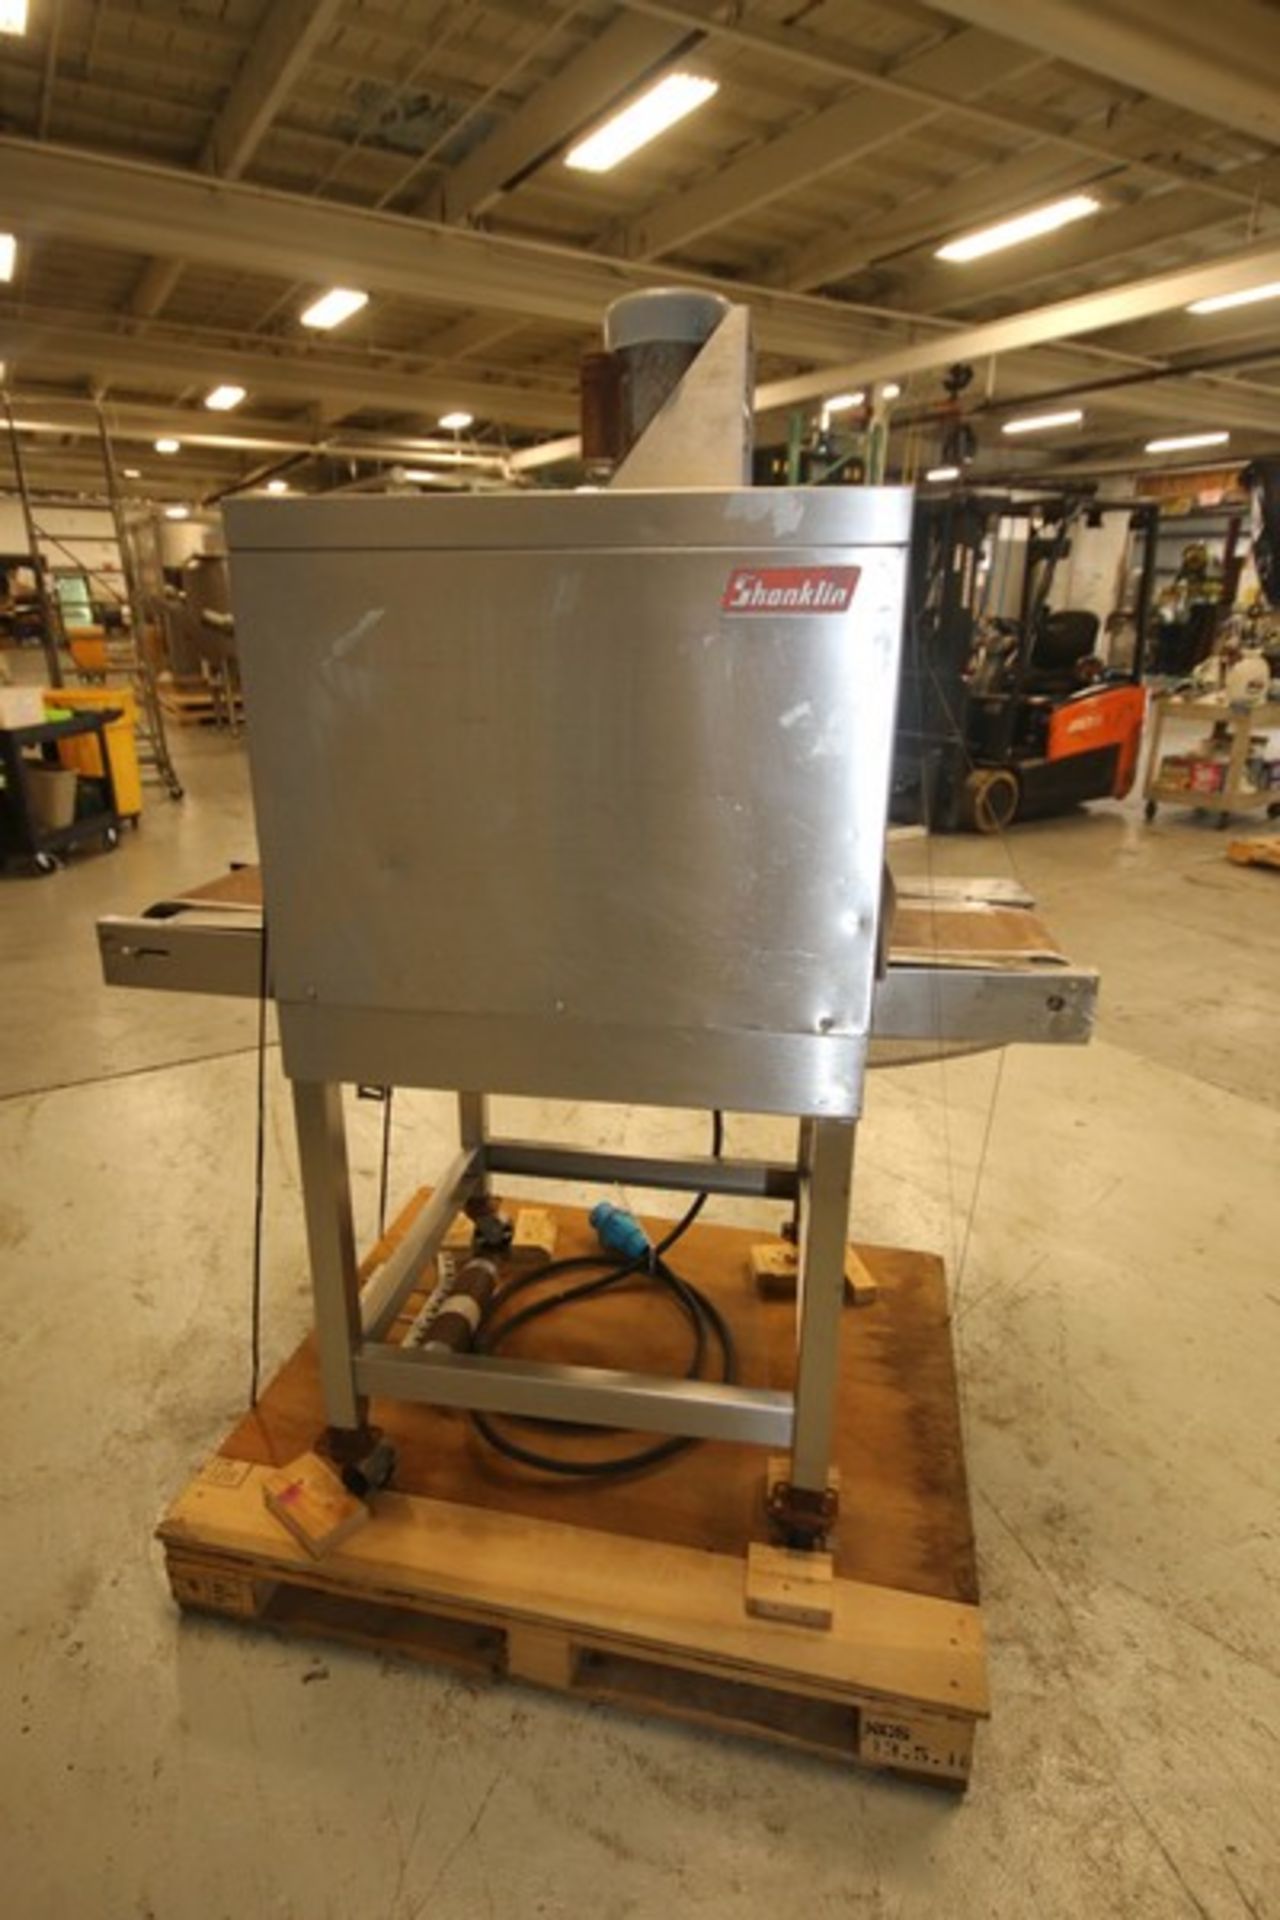 Shanklin 11" W x 6.5" H S/S Shrink Wrap Heat Tunnel, 115 V, Mounted on Casters (INV#88602)(Located @ - Image 3 of 8